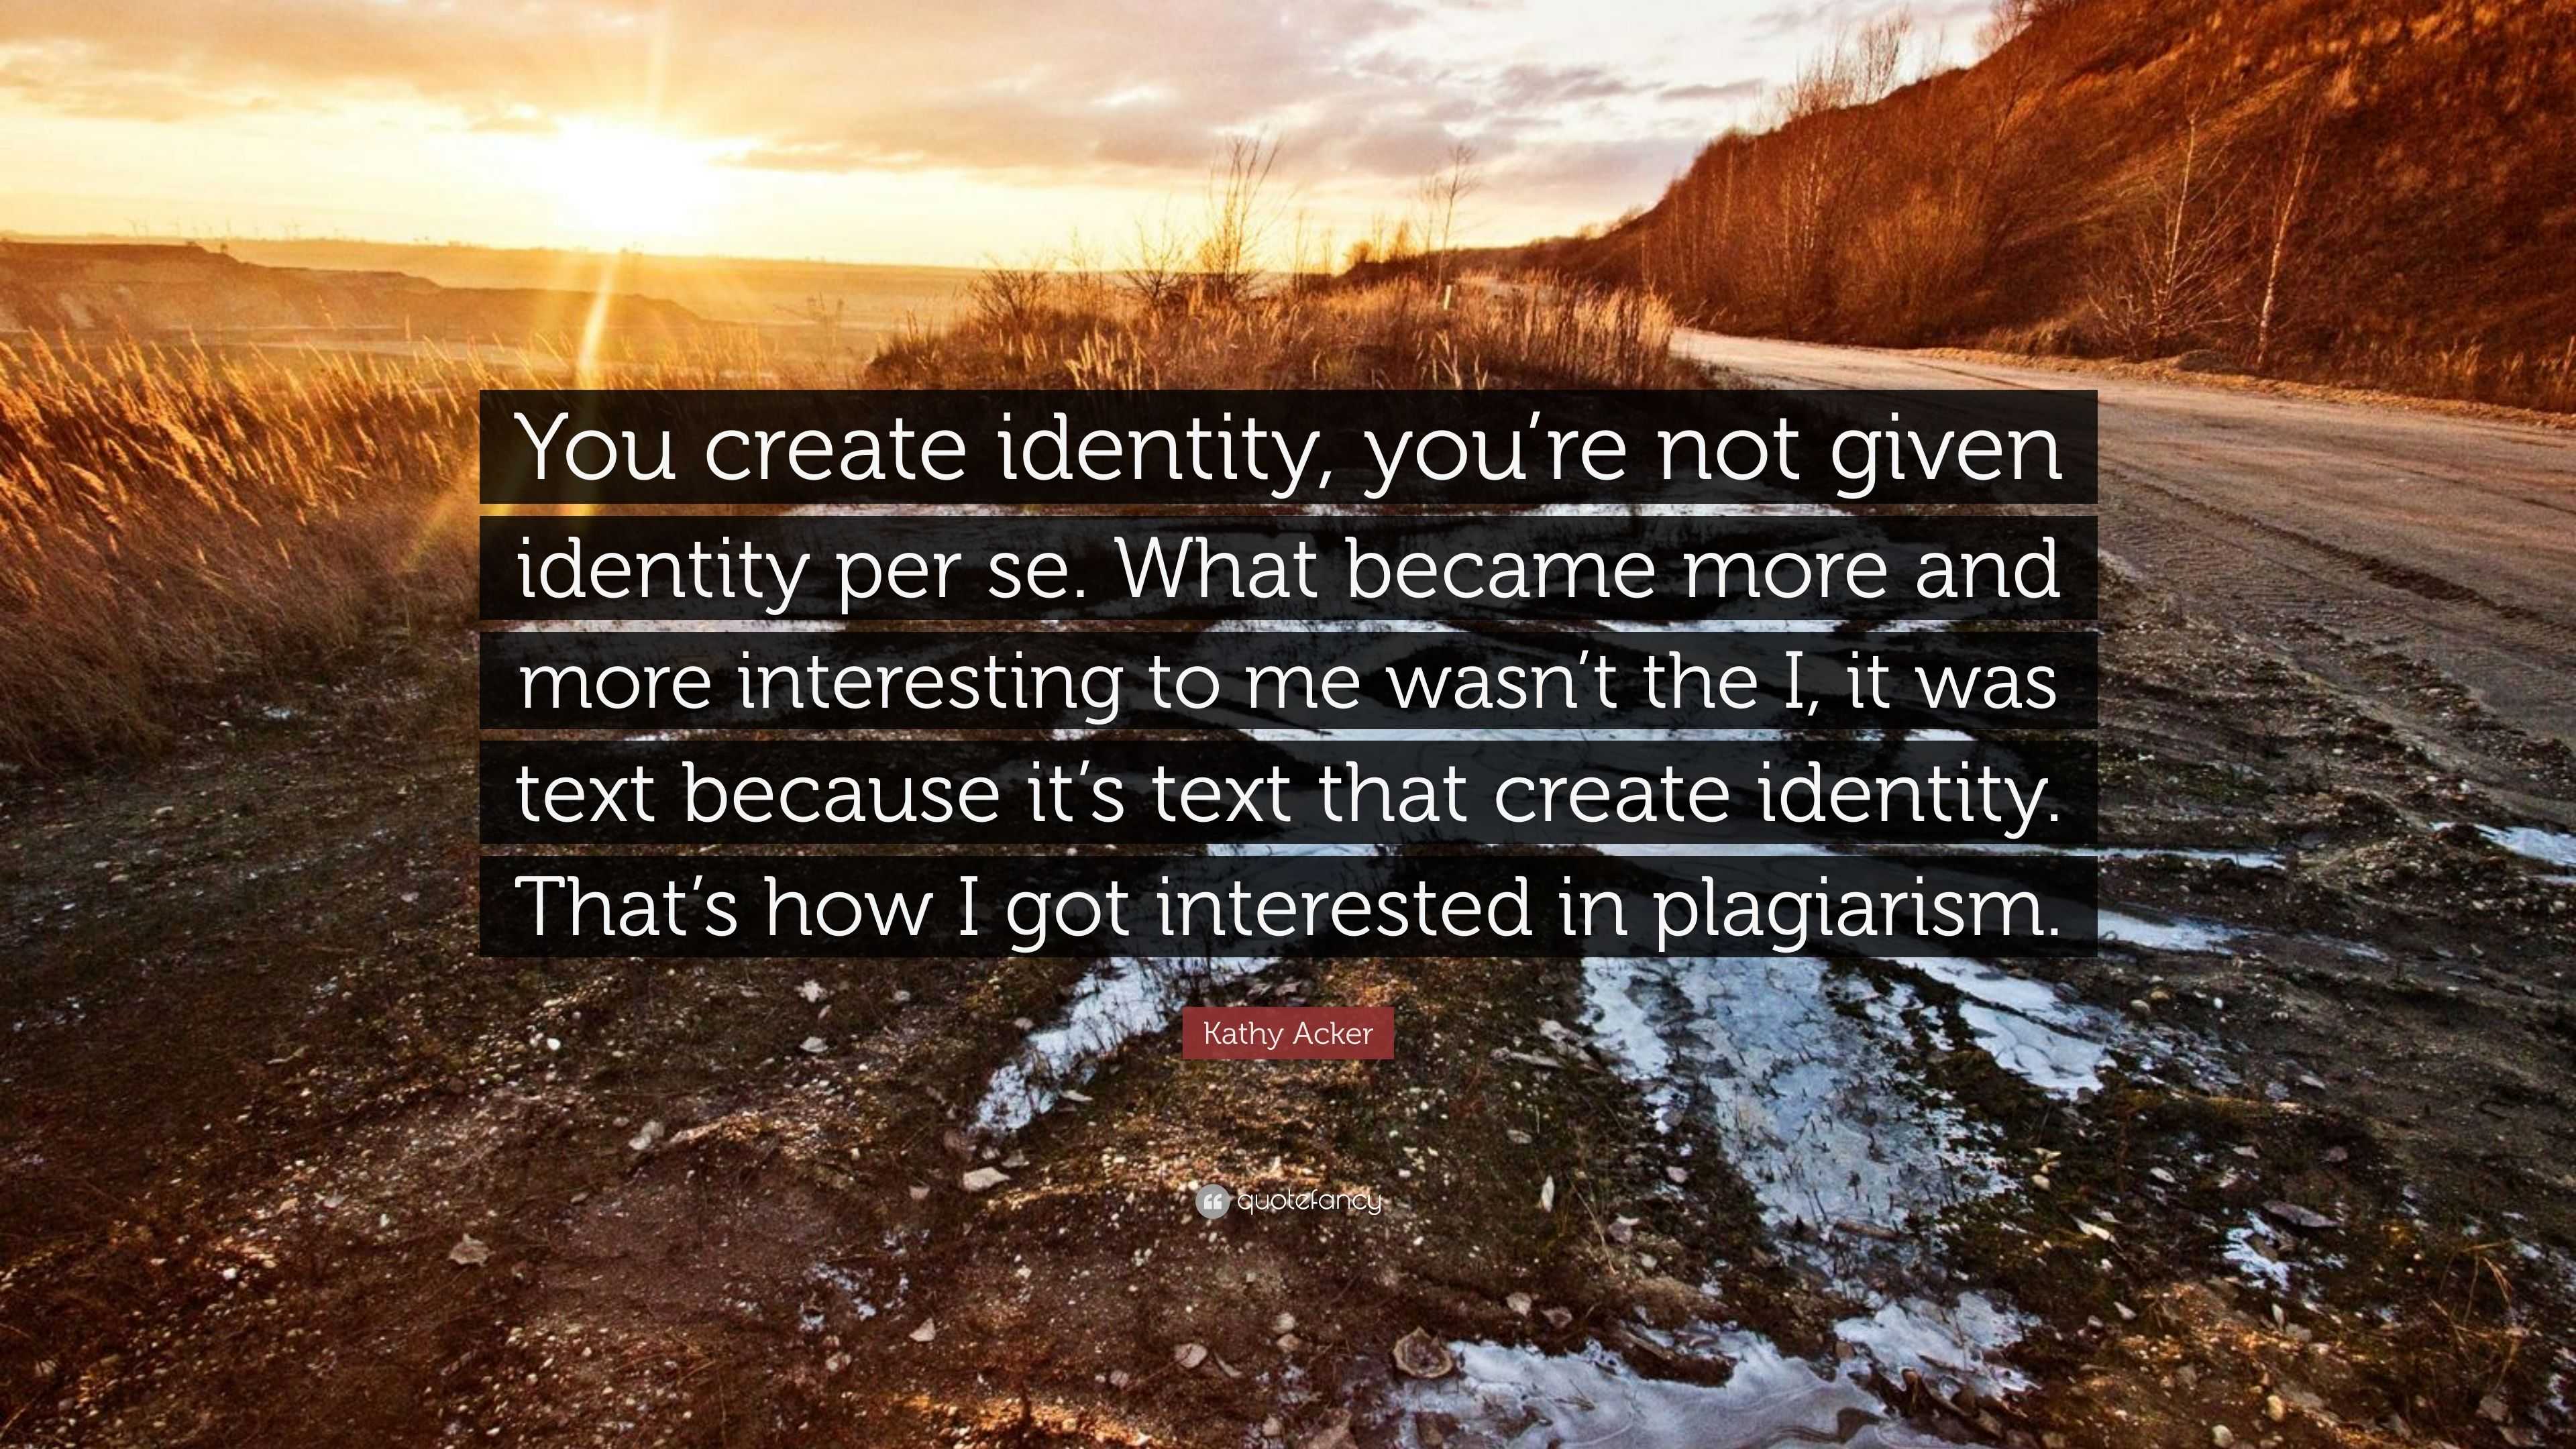 Kathy Acker Quote: “You create identity, you’re not given identity per